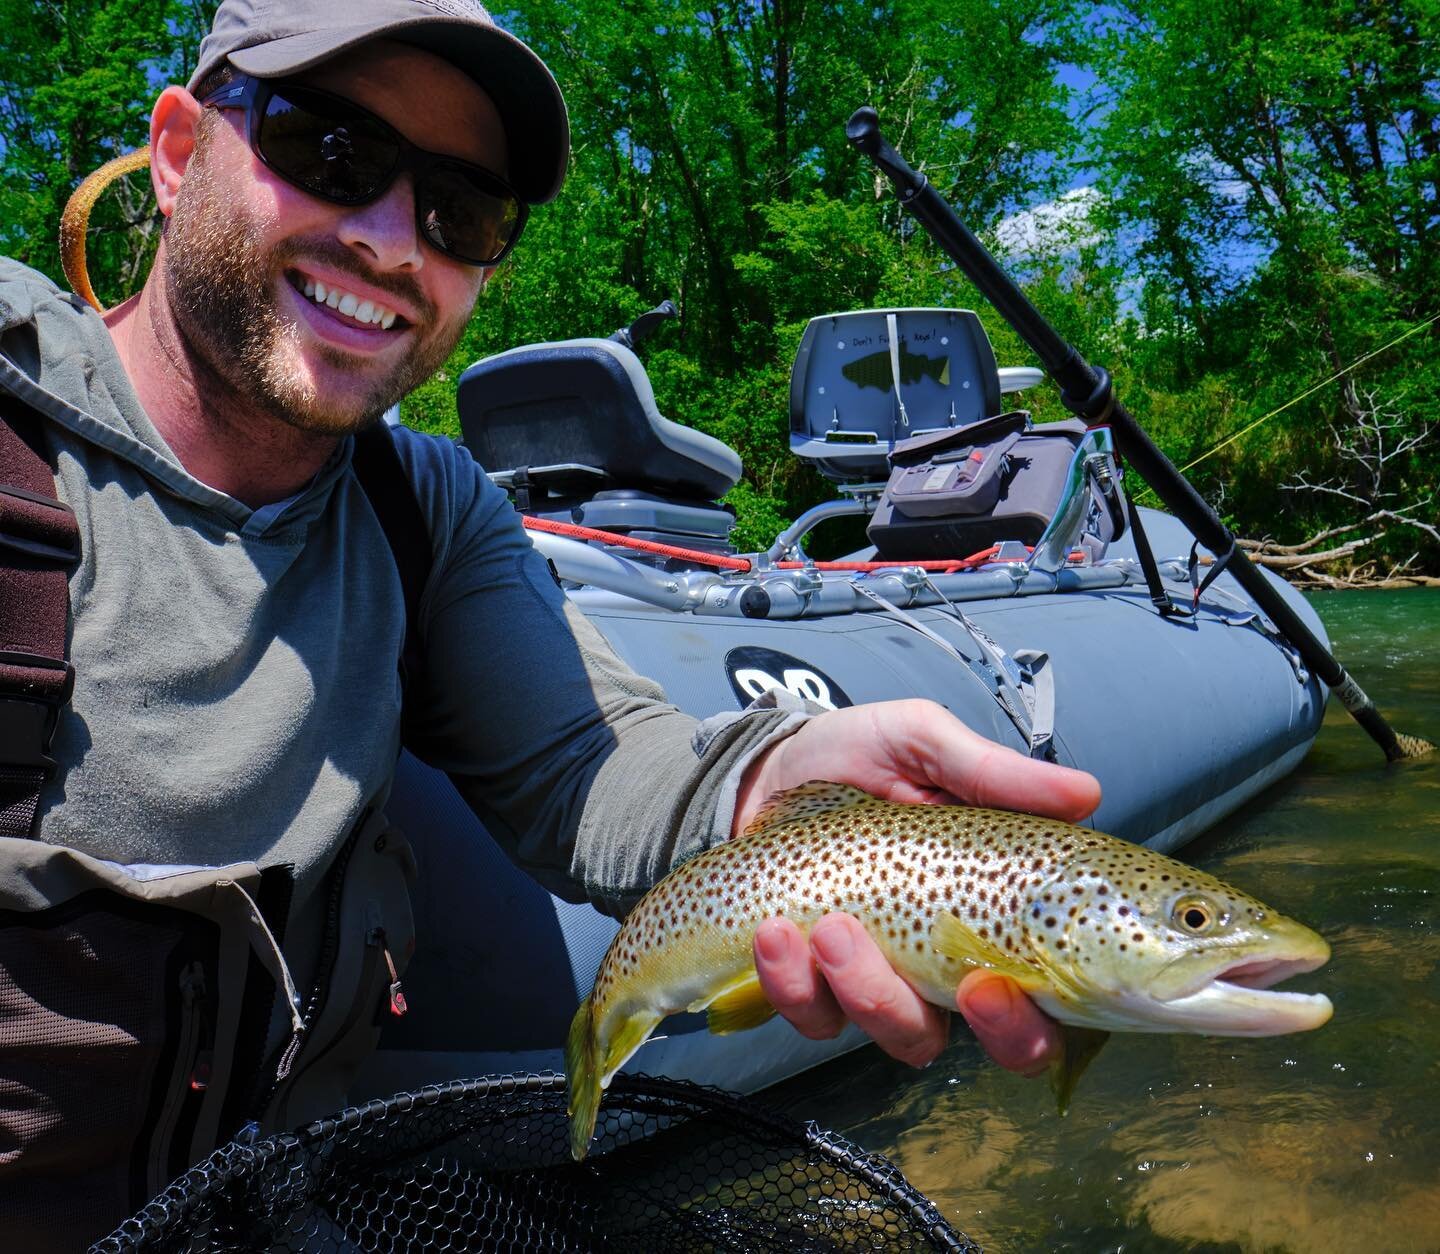 Putting the @rockymountainrafts to work! #flyfishing #troutfishing #browntrout #fishing #trout #onthefly #rafting #whitewater #westernnc #outdoors #adventure